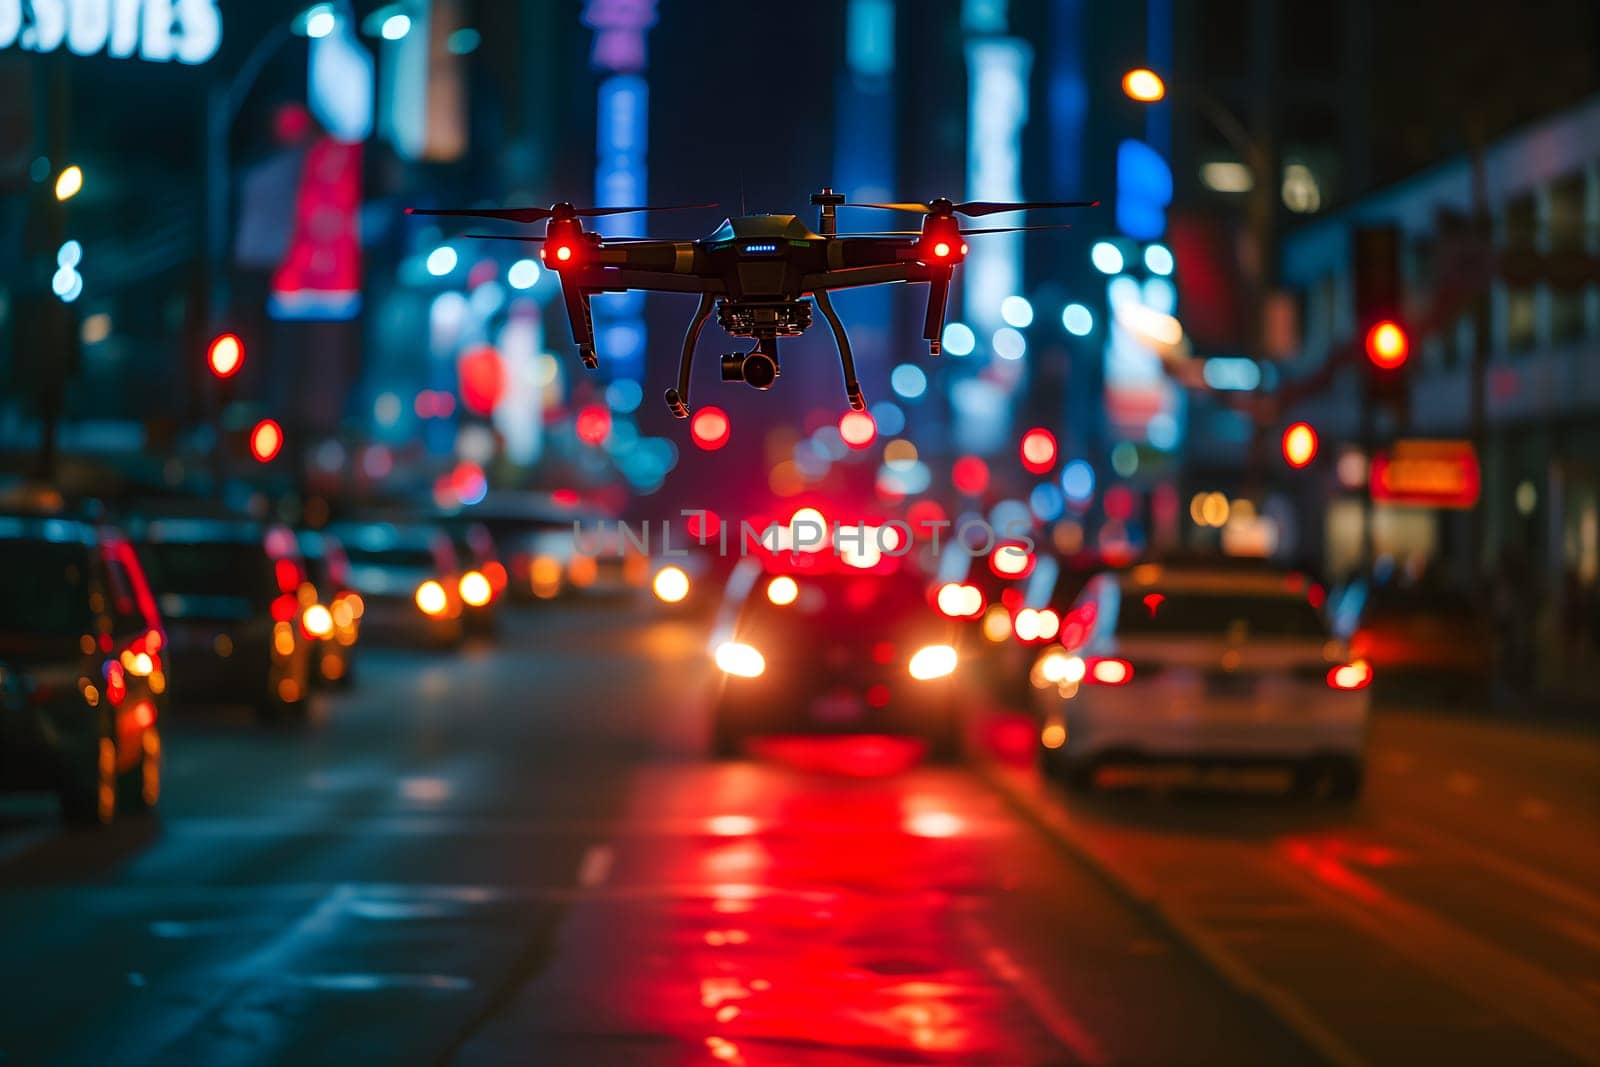 Copter drone flying low at night downtown city street. Neural network generated image. Not based on any actual scene or pattern.